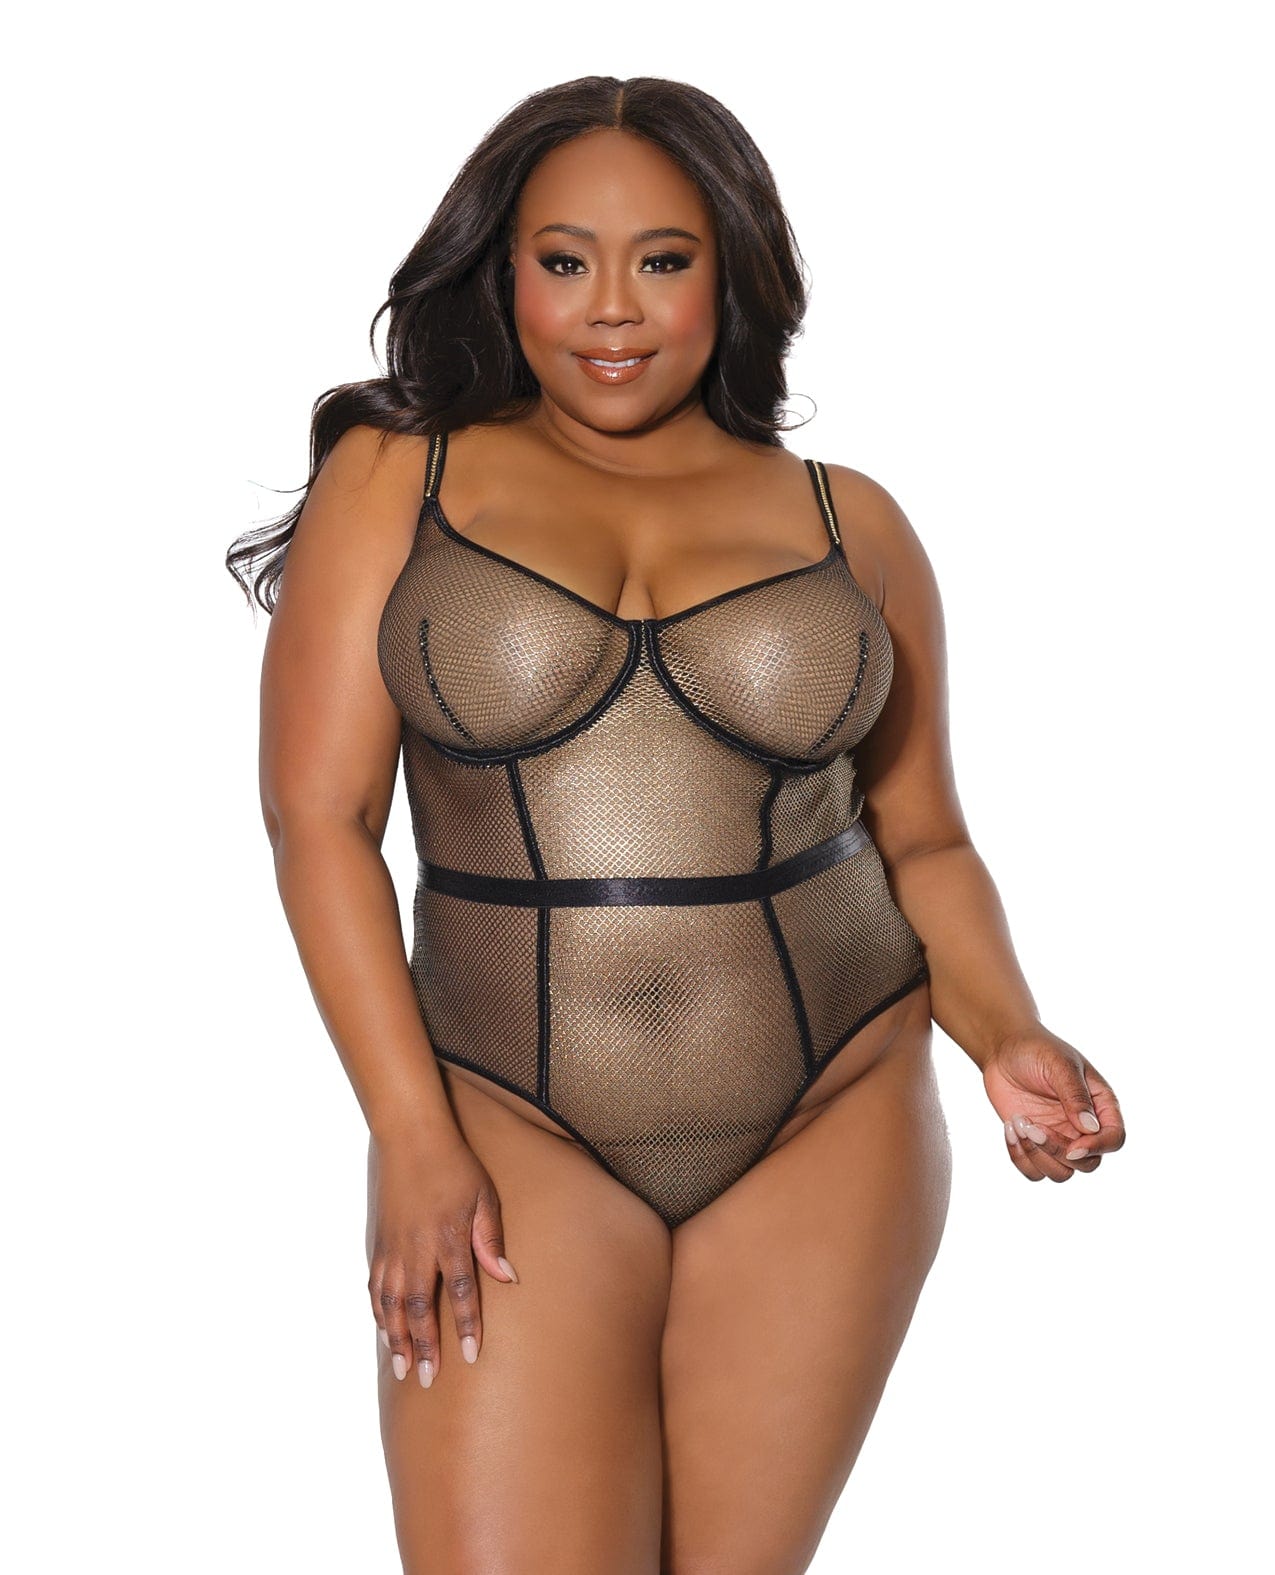 Holiday Metallic Fishnet Teddy w/Underwire Cups Black/Gold 1X/2X Lingerie - Plus/queen - Hanging